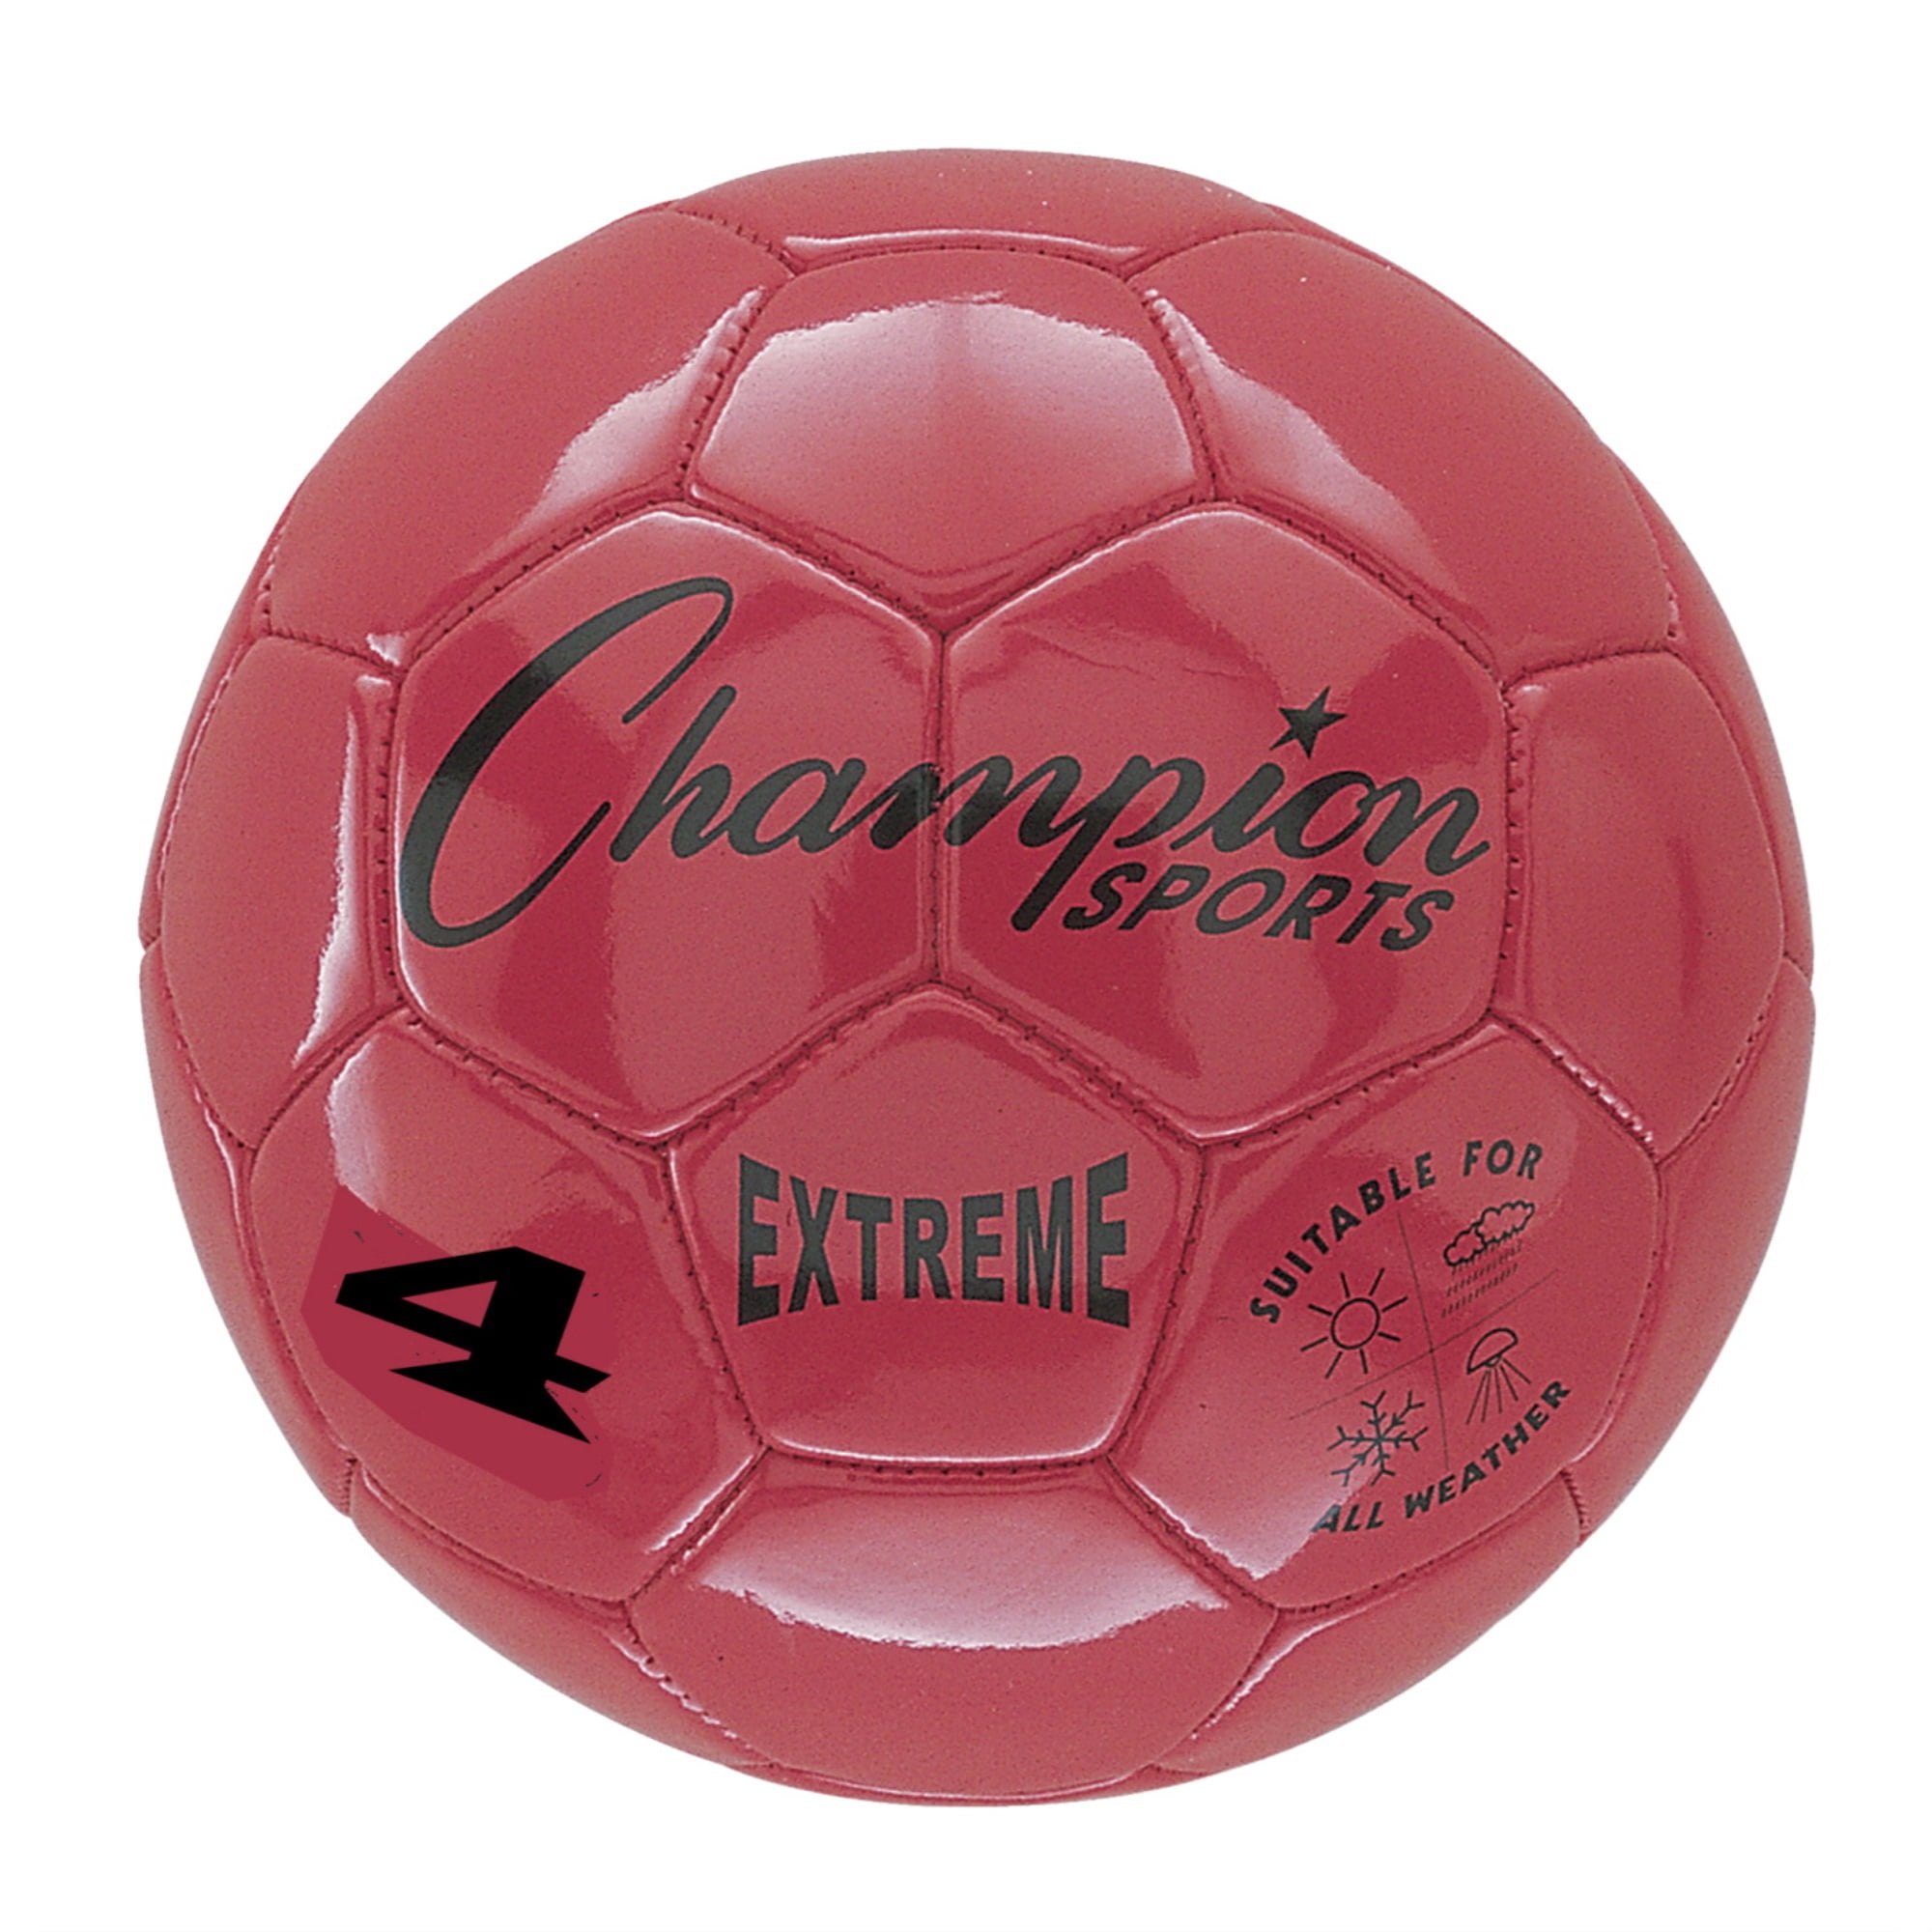 Sizes 3 Champion Sports Extreme Series Composite Soccer Ball 4 5 in Multiple Colors